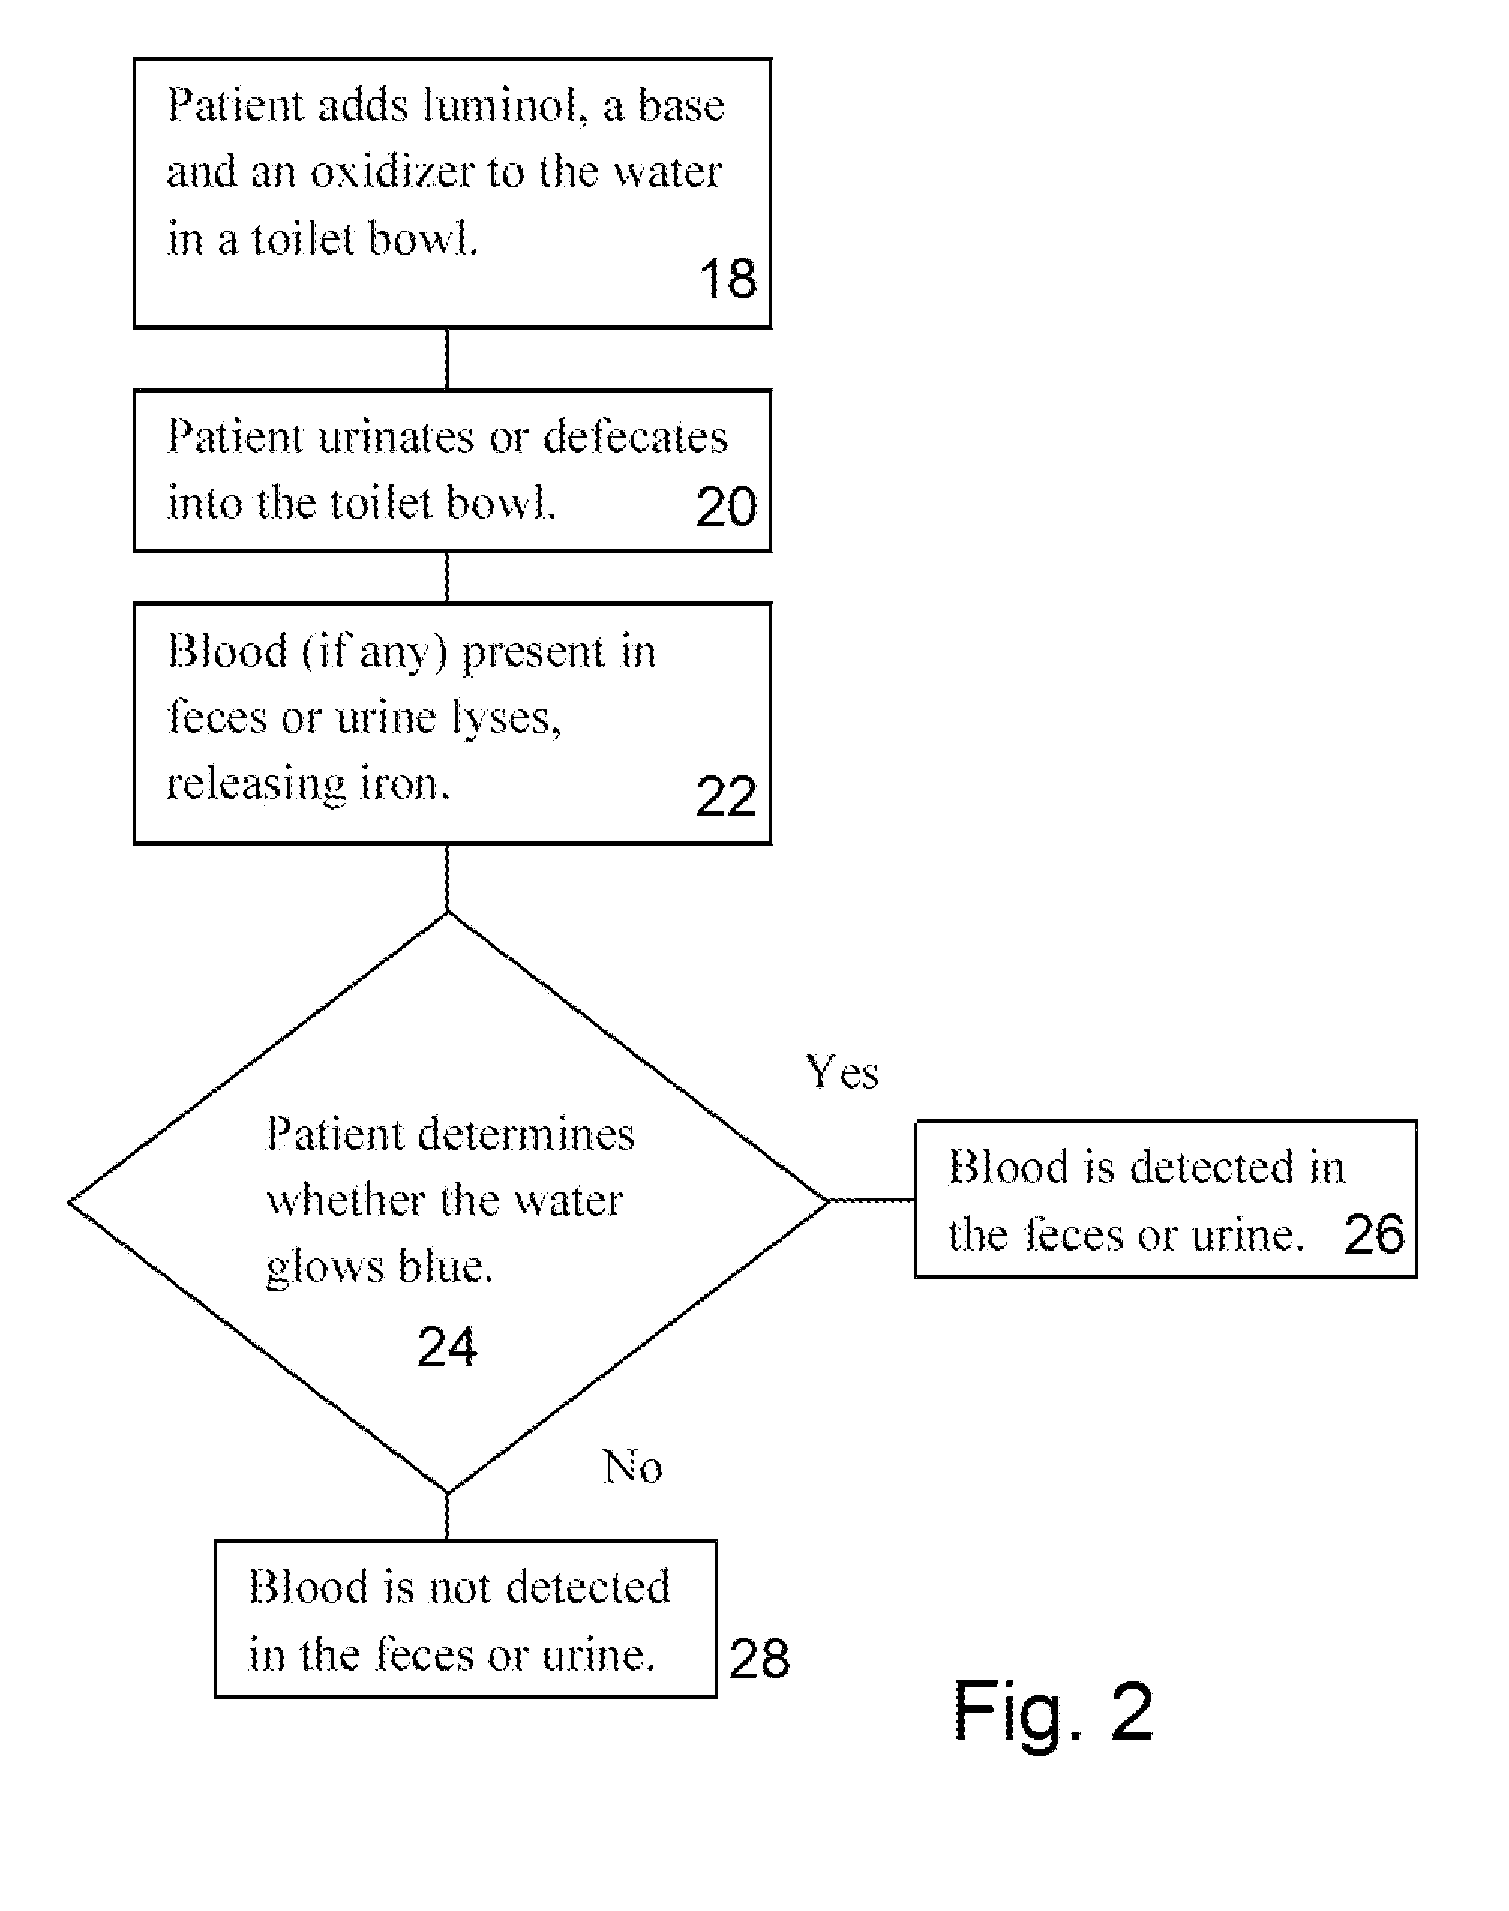 Apparatus and Method for the Remote Sensing of Blood in Human Feces and Urine